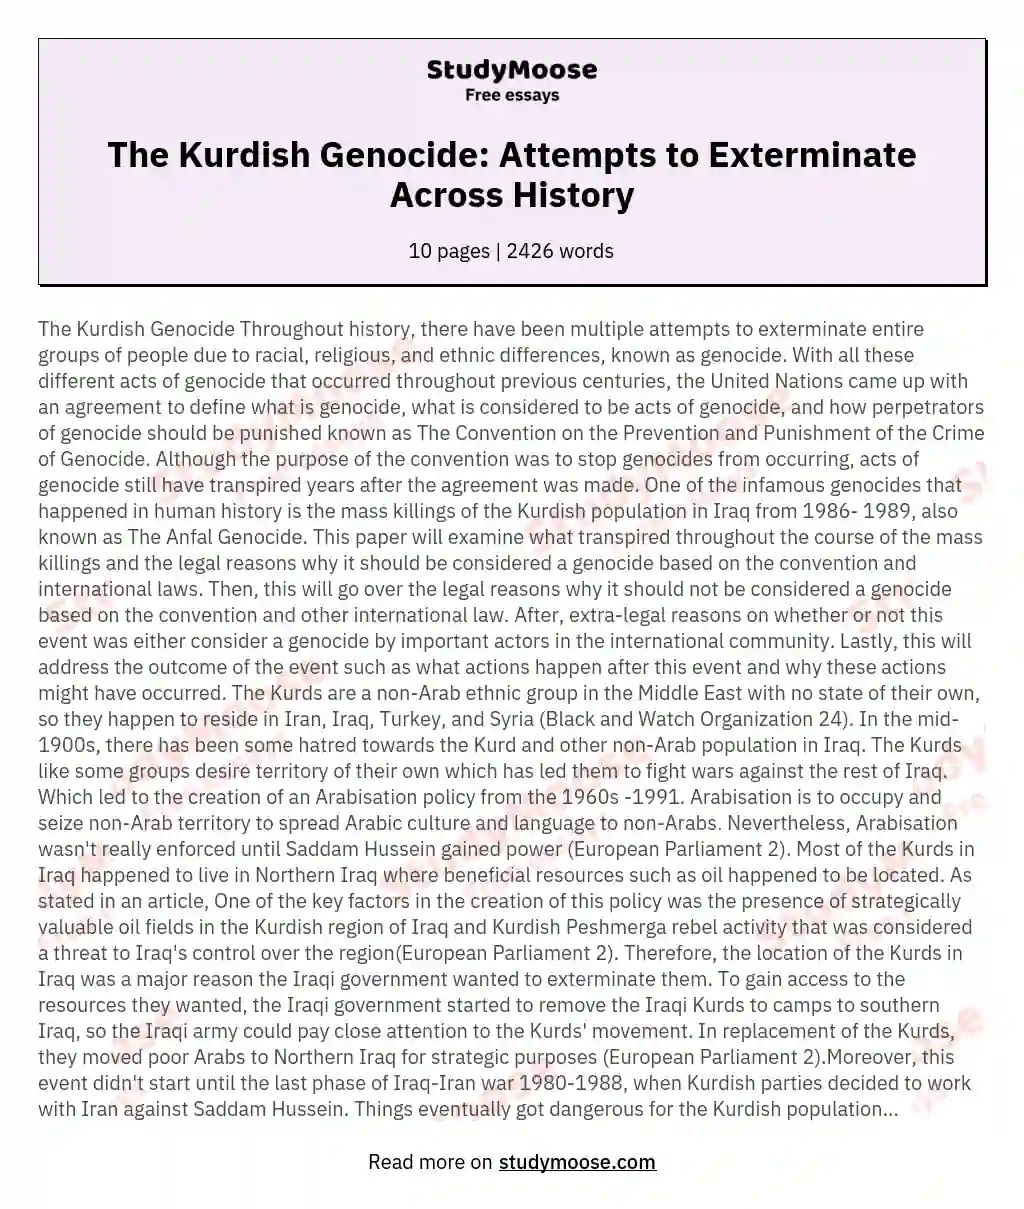 The Kurdish Genocide: Attempts to Exterminate Across History essay